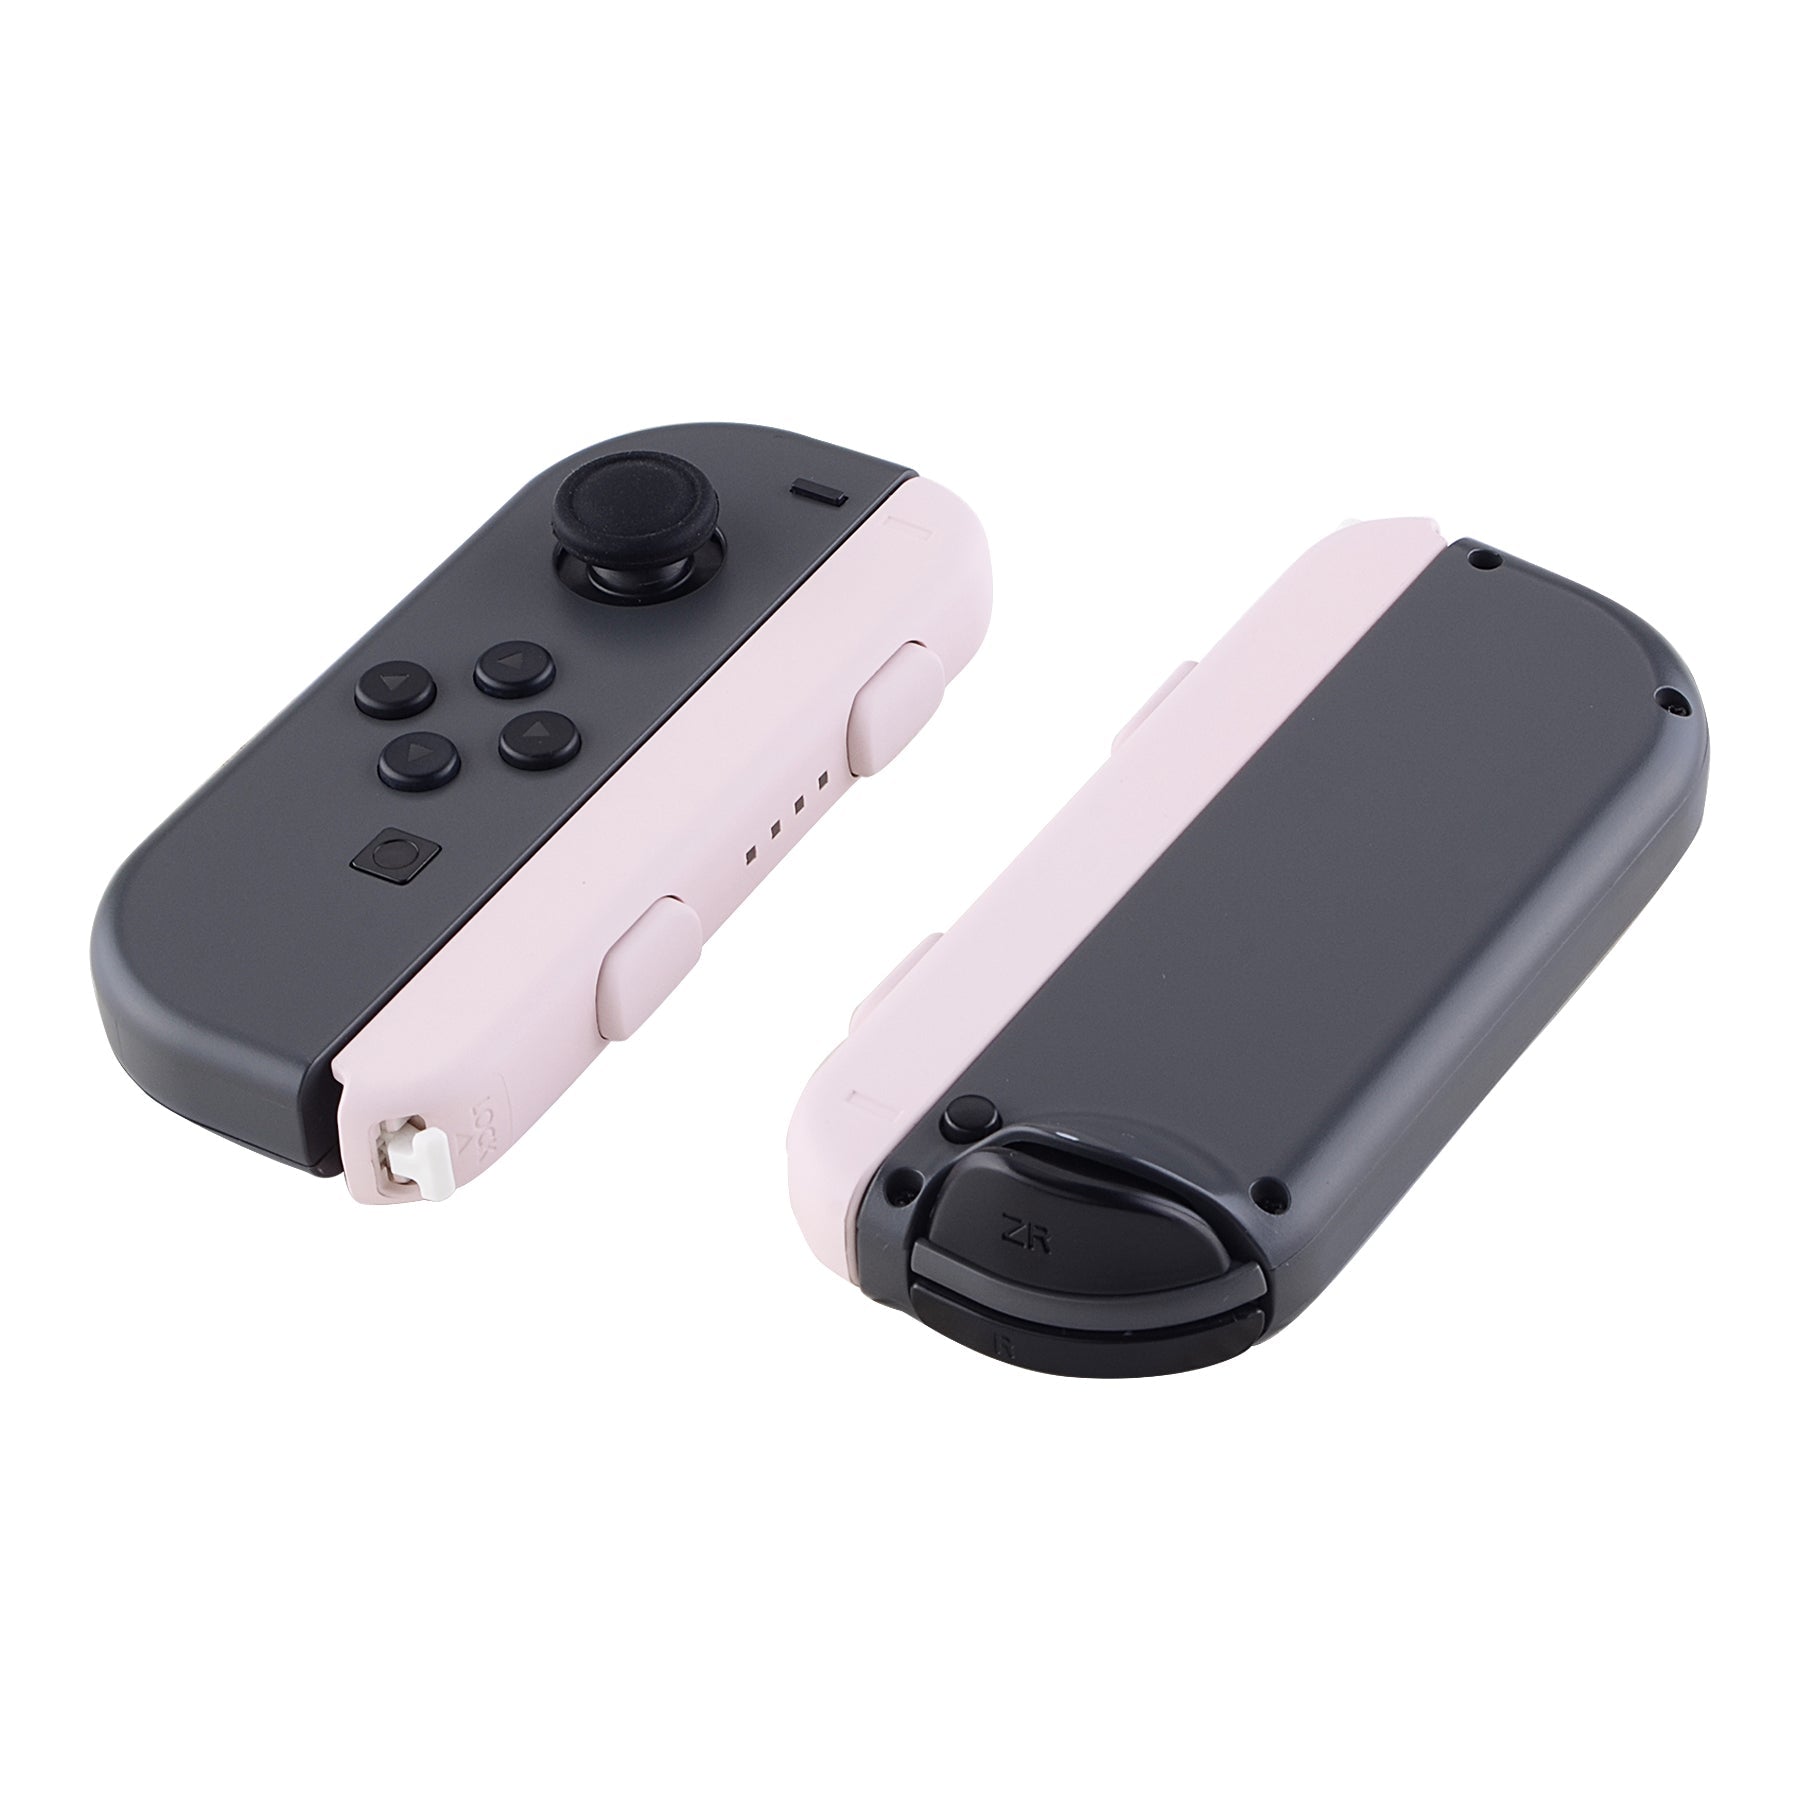 Custom Nintendo Switch Joy-con Controllers Pink With Black Buttons